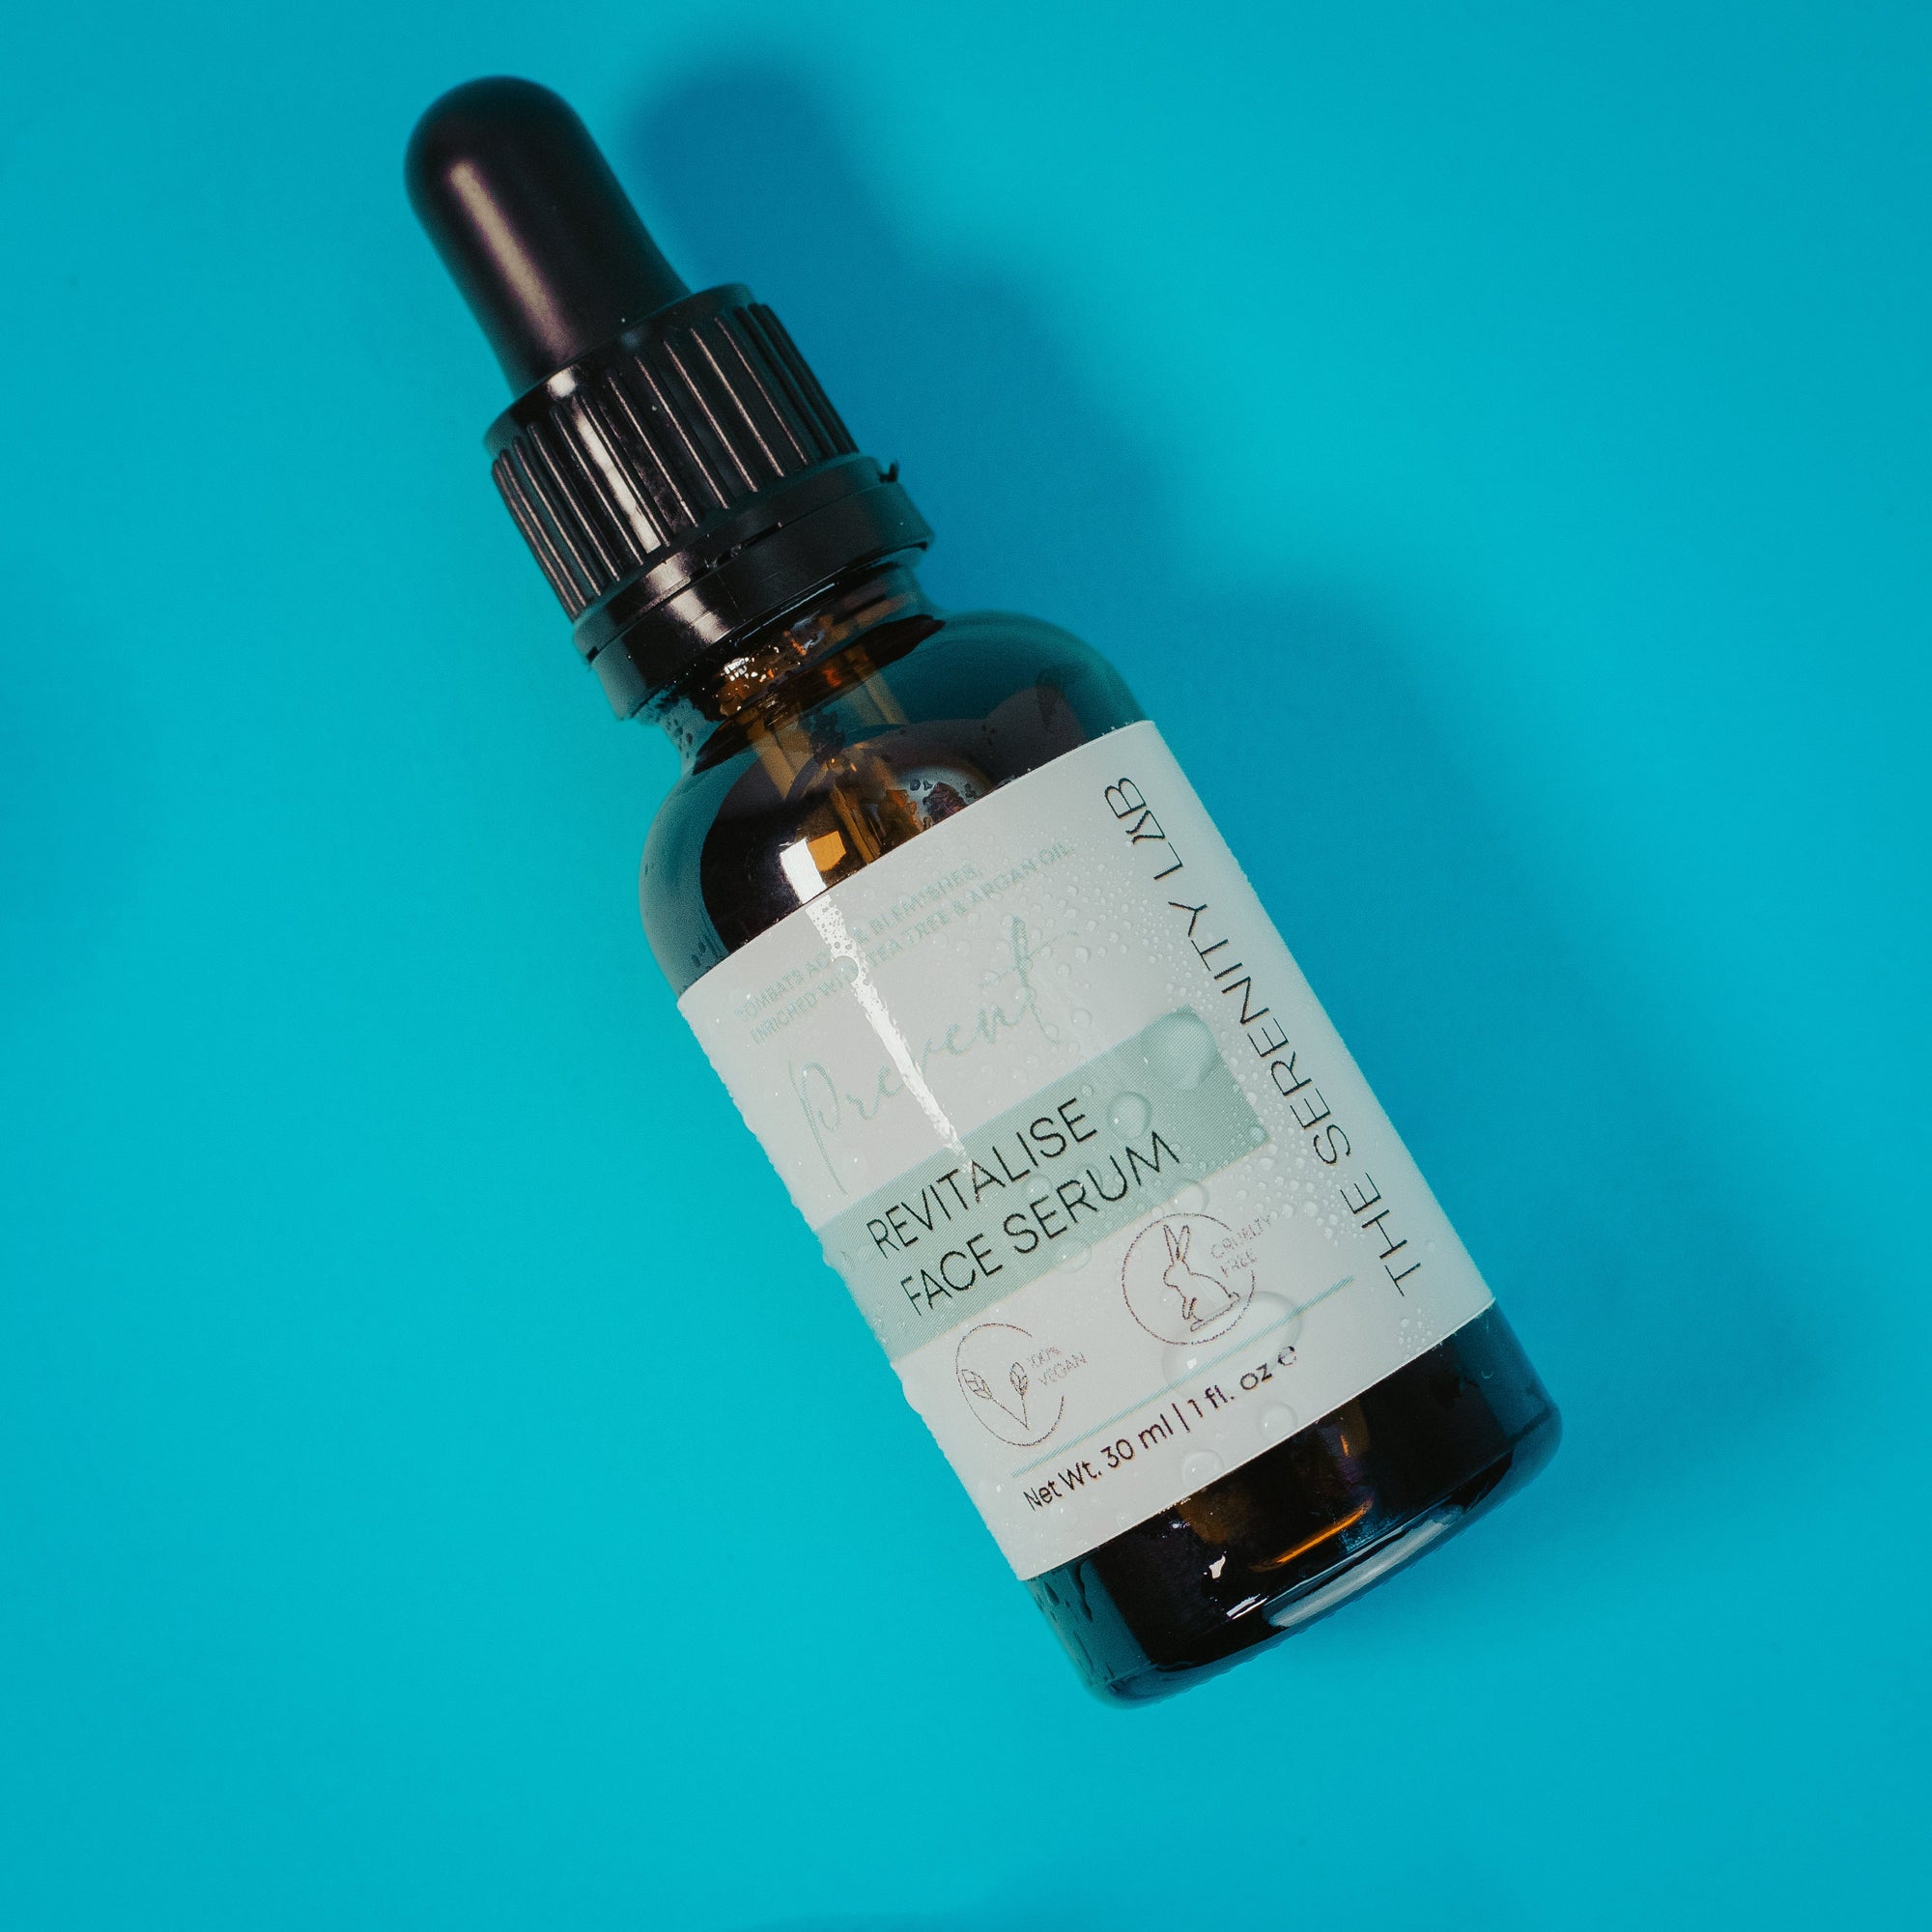 The Serenity Lab's Revitalise Face Serum: Will Tea Tree Oil Help Acne?